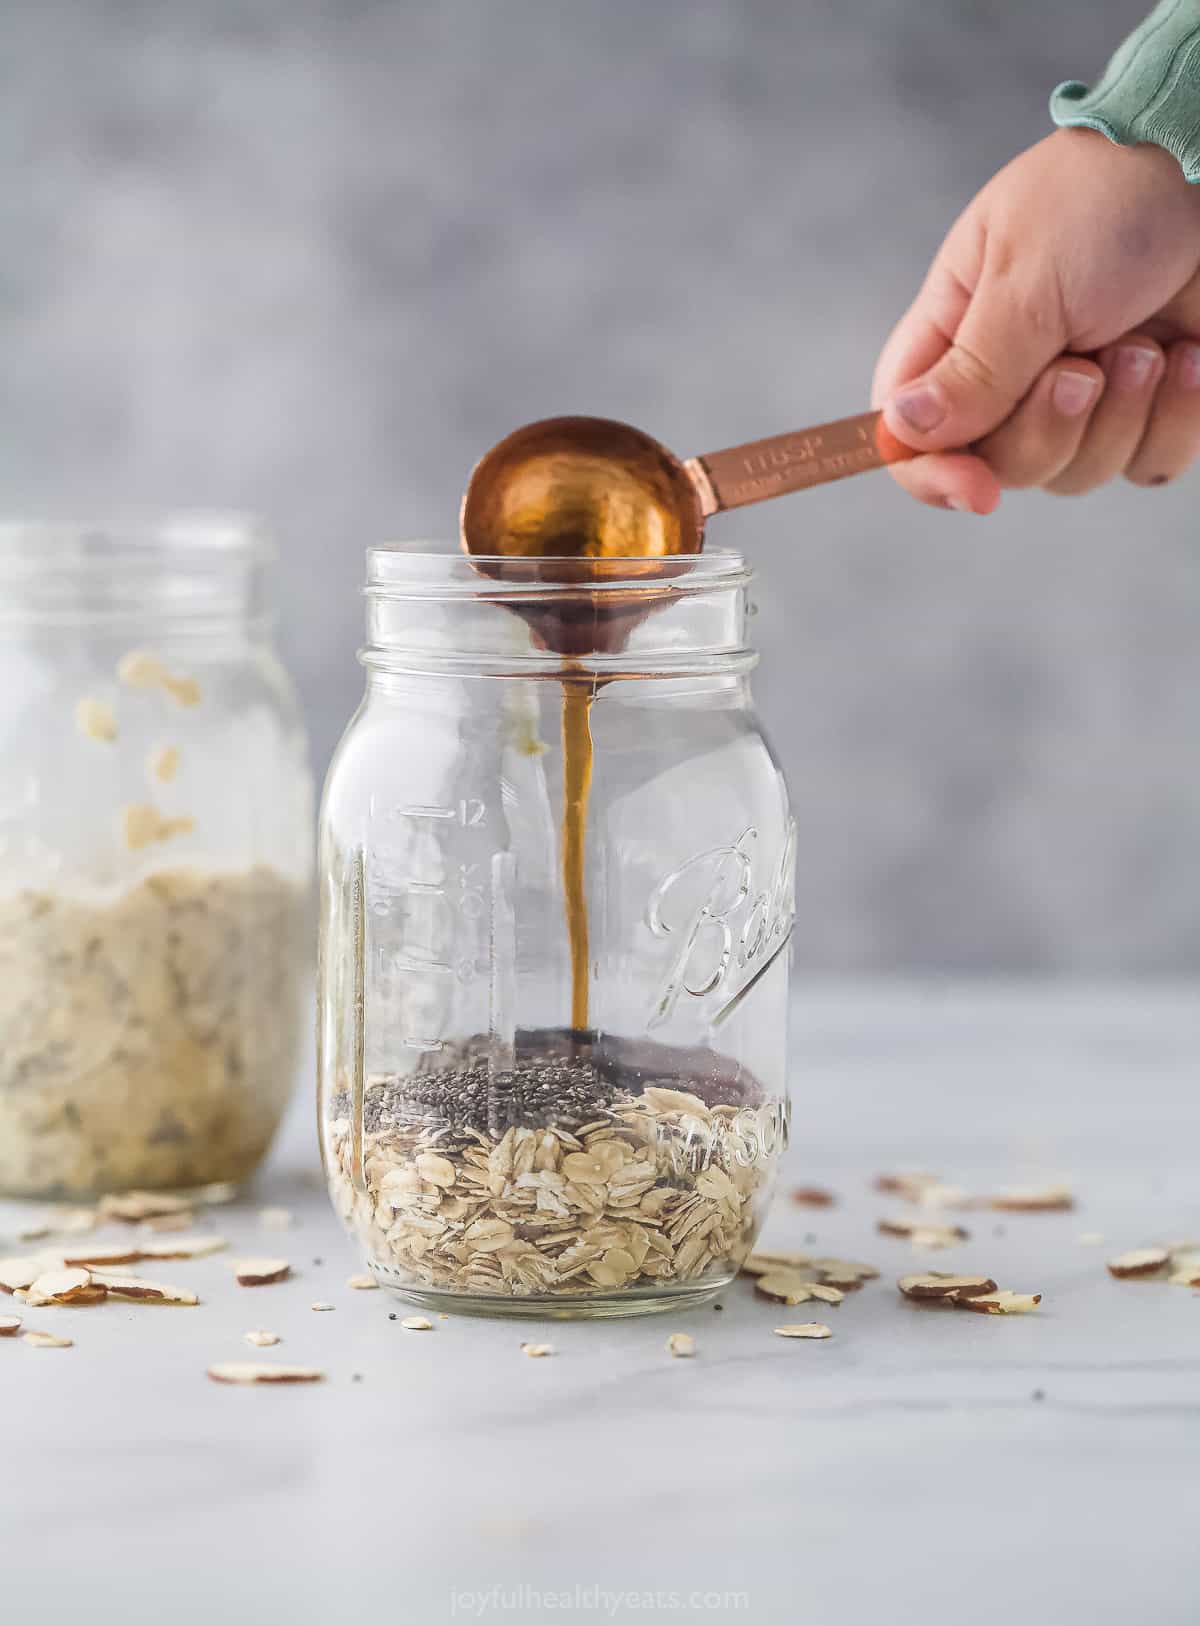 A tablespoon of pure maple syrup being poured into a jar full of chia seeds and old-fashioned oats